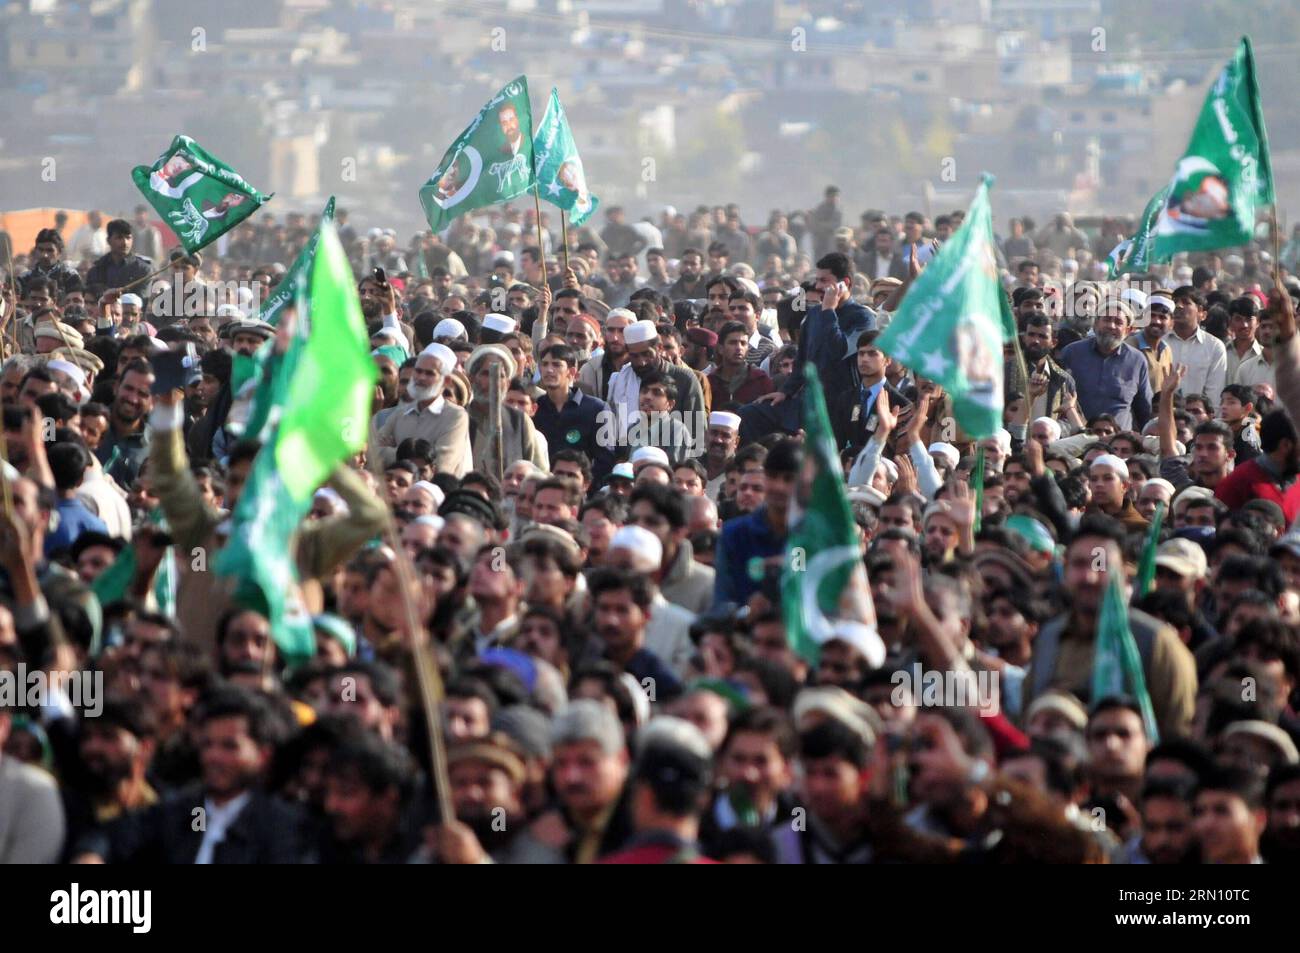 (141129) -- HAVELIAN, Nov. 29, 2014 -- Supporters of ruling party Pakistan Muslim League-Nawaz (PML-N) gathered during a public meeting in northwest Pakistan s Havelian on Nov. 29, 2014. Pakistani Prime Minister Nawaz Sharif addressing a huge public meeting at Havelian on Saturday said that the multi-dimensional projects being undertaken by PML-N government would make Pakistan an Asian tiger. ) PAKISTAN-HAVELIAN-NAWAZ SHARIF-PUBLIC-MEETING AhmadxKamal PUBLICATIONxNOTxINxCHN   Nov 29 2014 Supporters of ruling Party Pakistan Muslim League Nawaz PML n gathered during a Public Meeting in Northwest Stock Photo